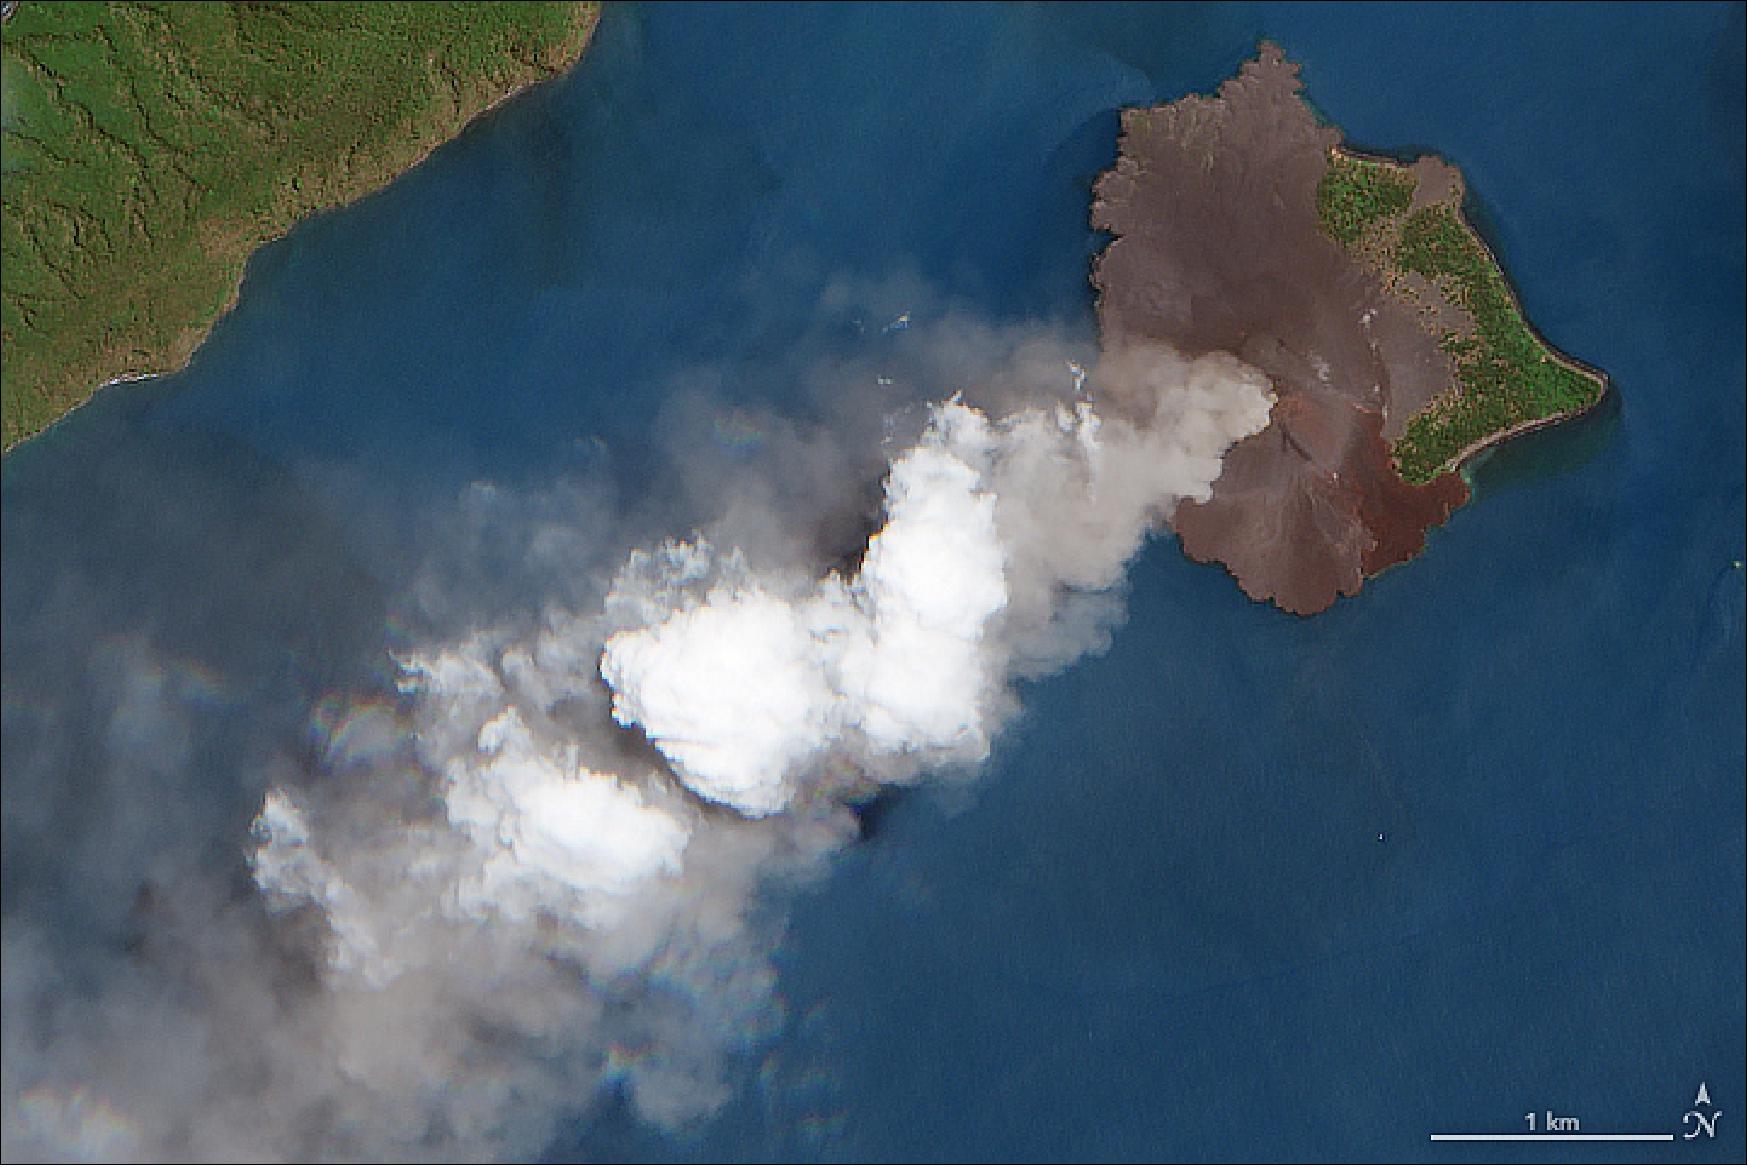 Figure 57: The MSI (MultiSpectral Imager) on ESA's Sentinel-2satellite acquired this detailed image of Krakatau on 22 September 2018.Ash from the Indonesian volcano streamed over the Sunda Strait (image credit: NASA Earth Observatory using modified Copernicus Sentinel data (2018) processed by the European Space Agency,: image by Joshua Stevens, story by Kathryn Hansen)